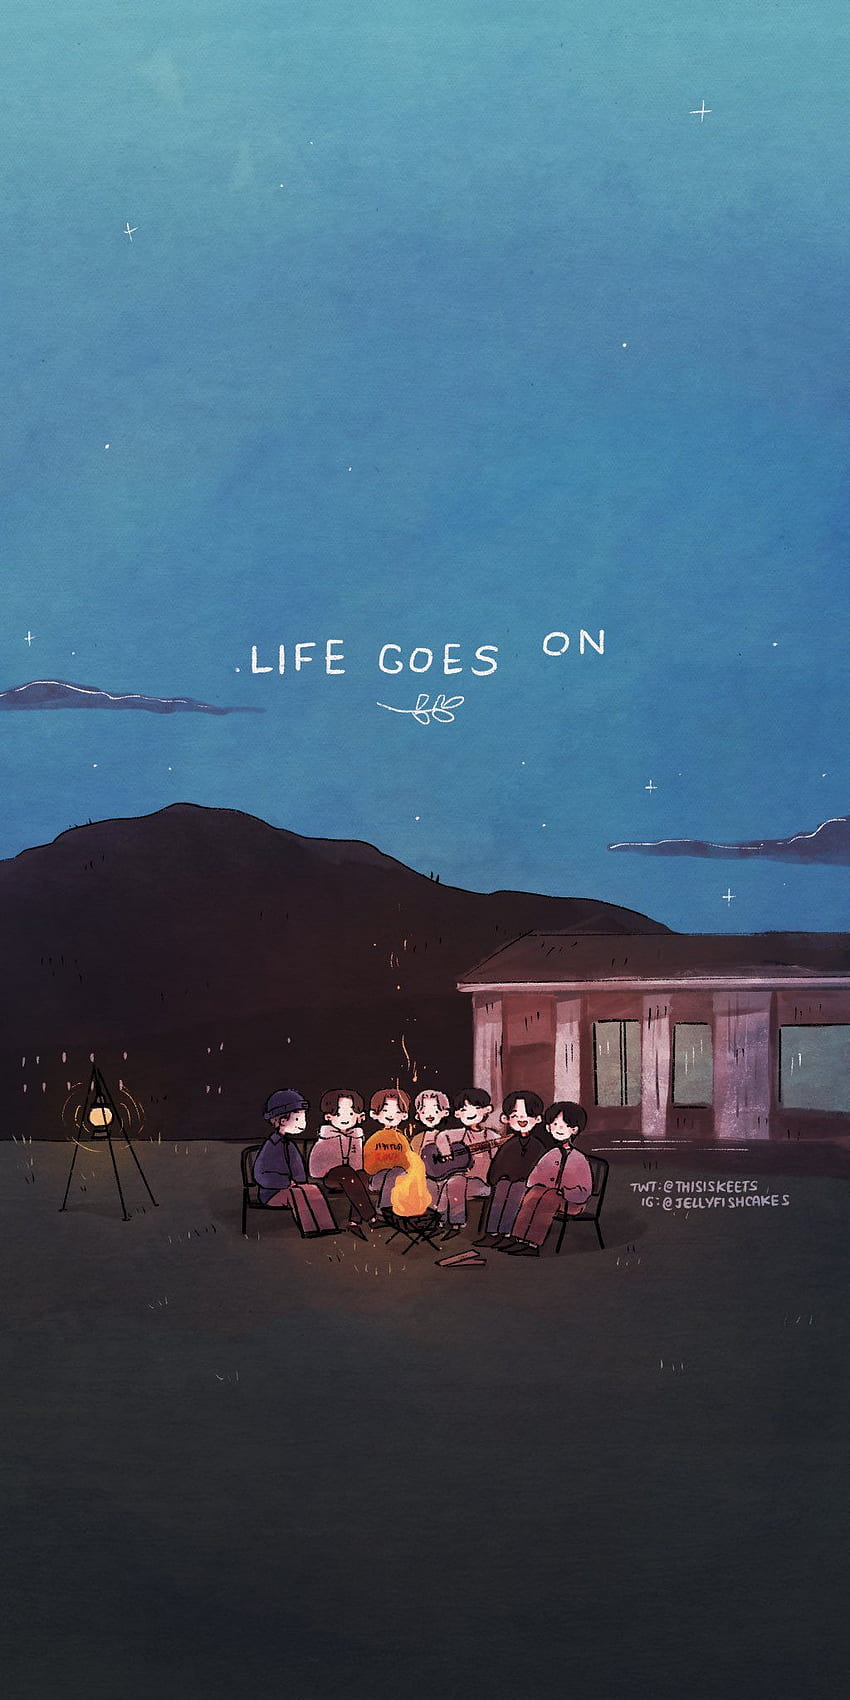 Life Goes On Wallpaper  NawPic